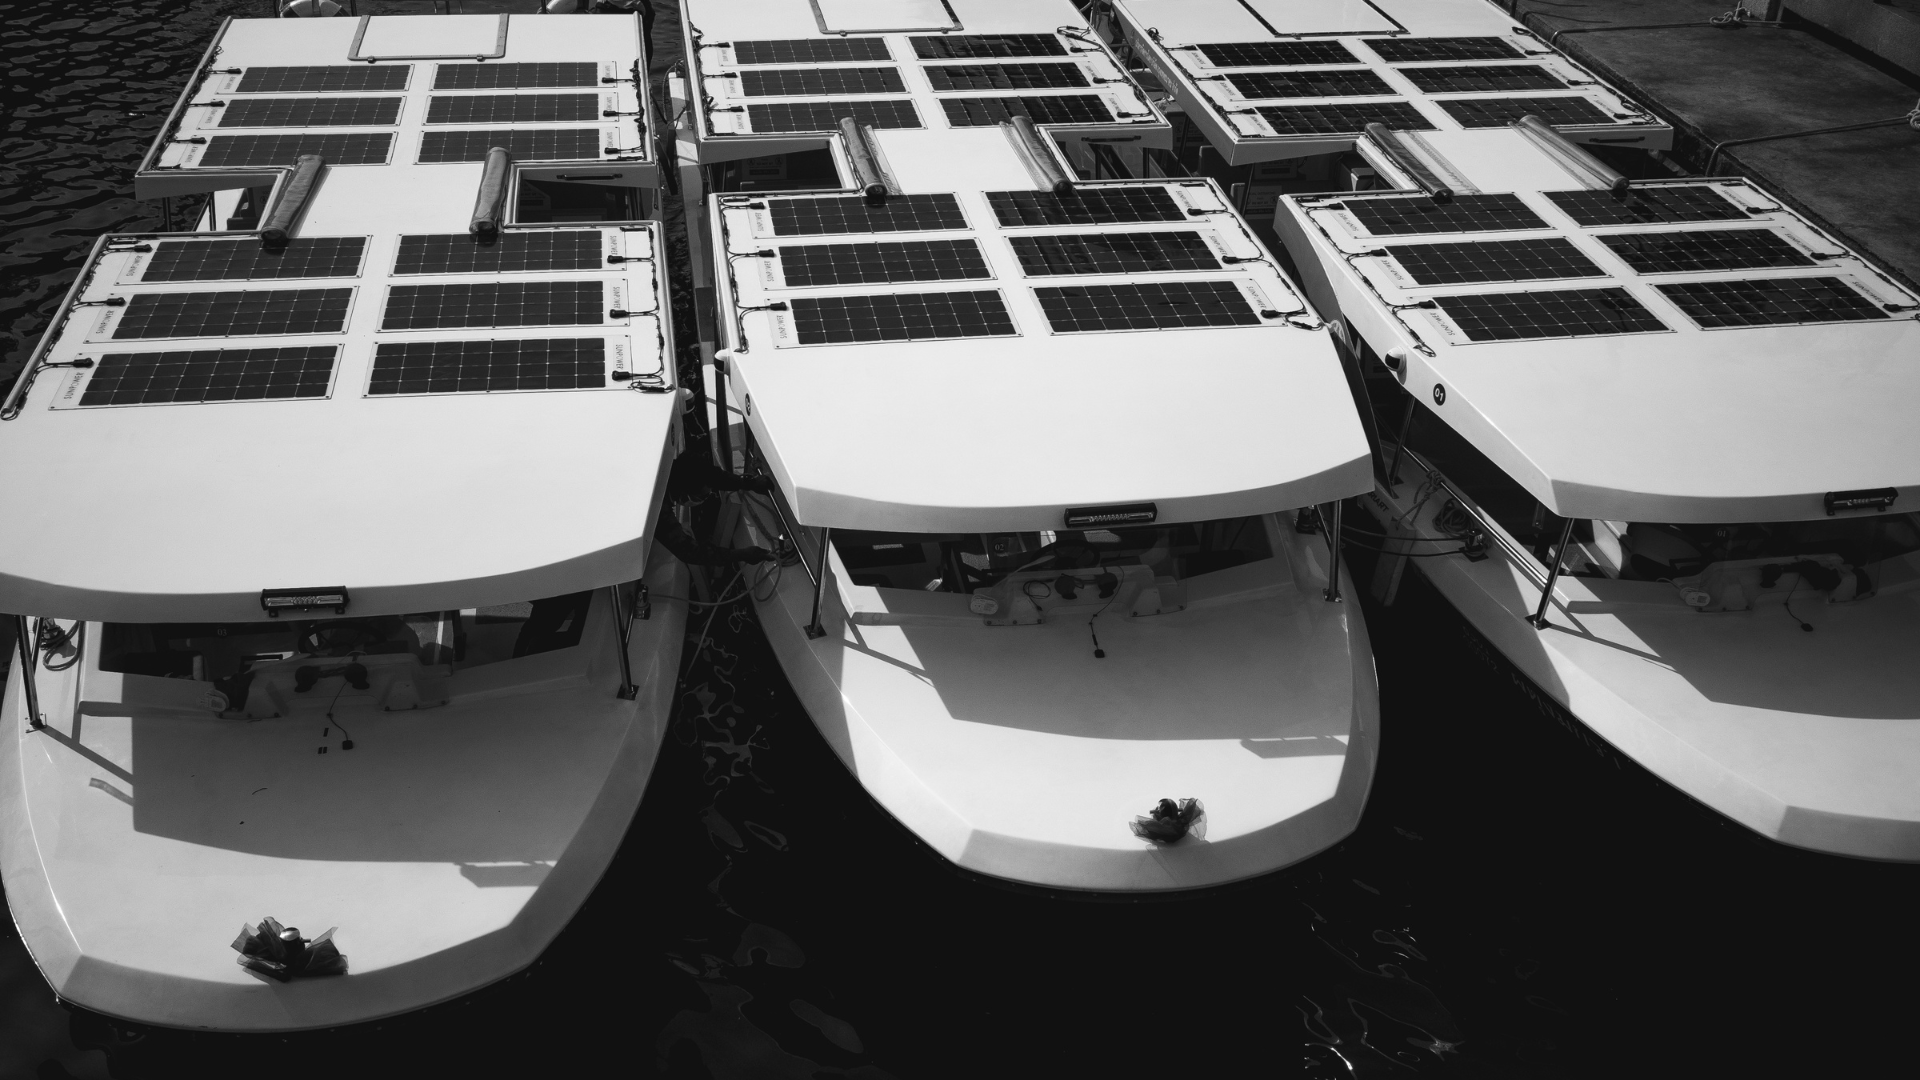 Boats with solar panels on roof